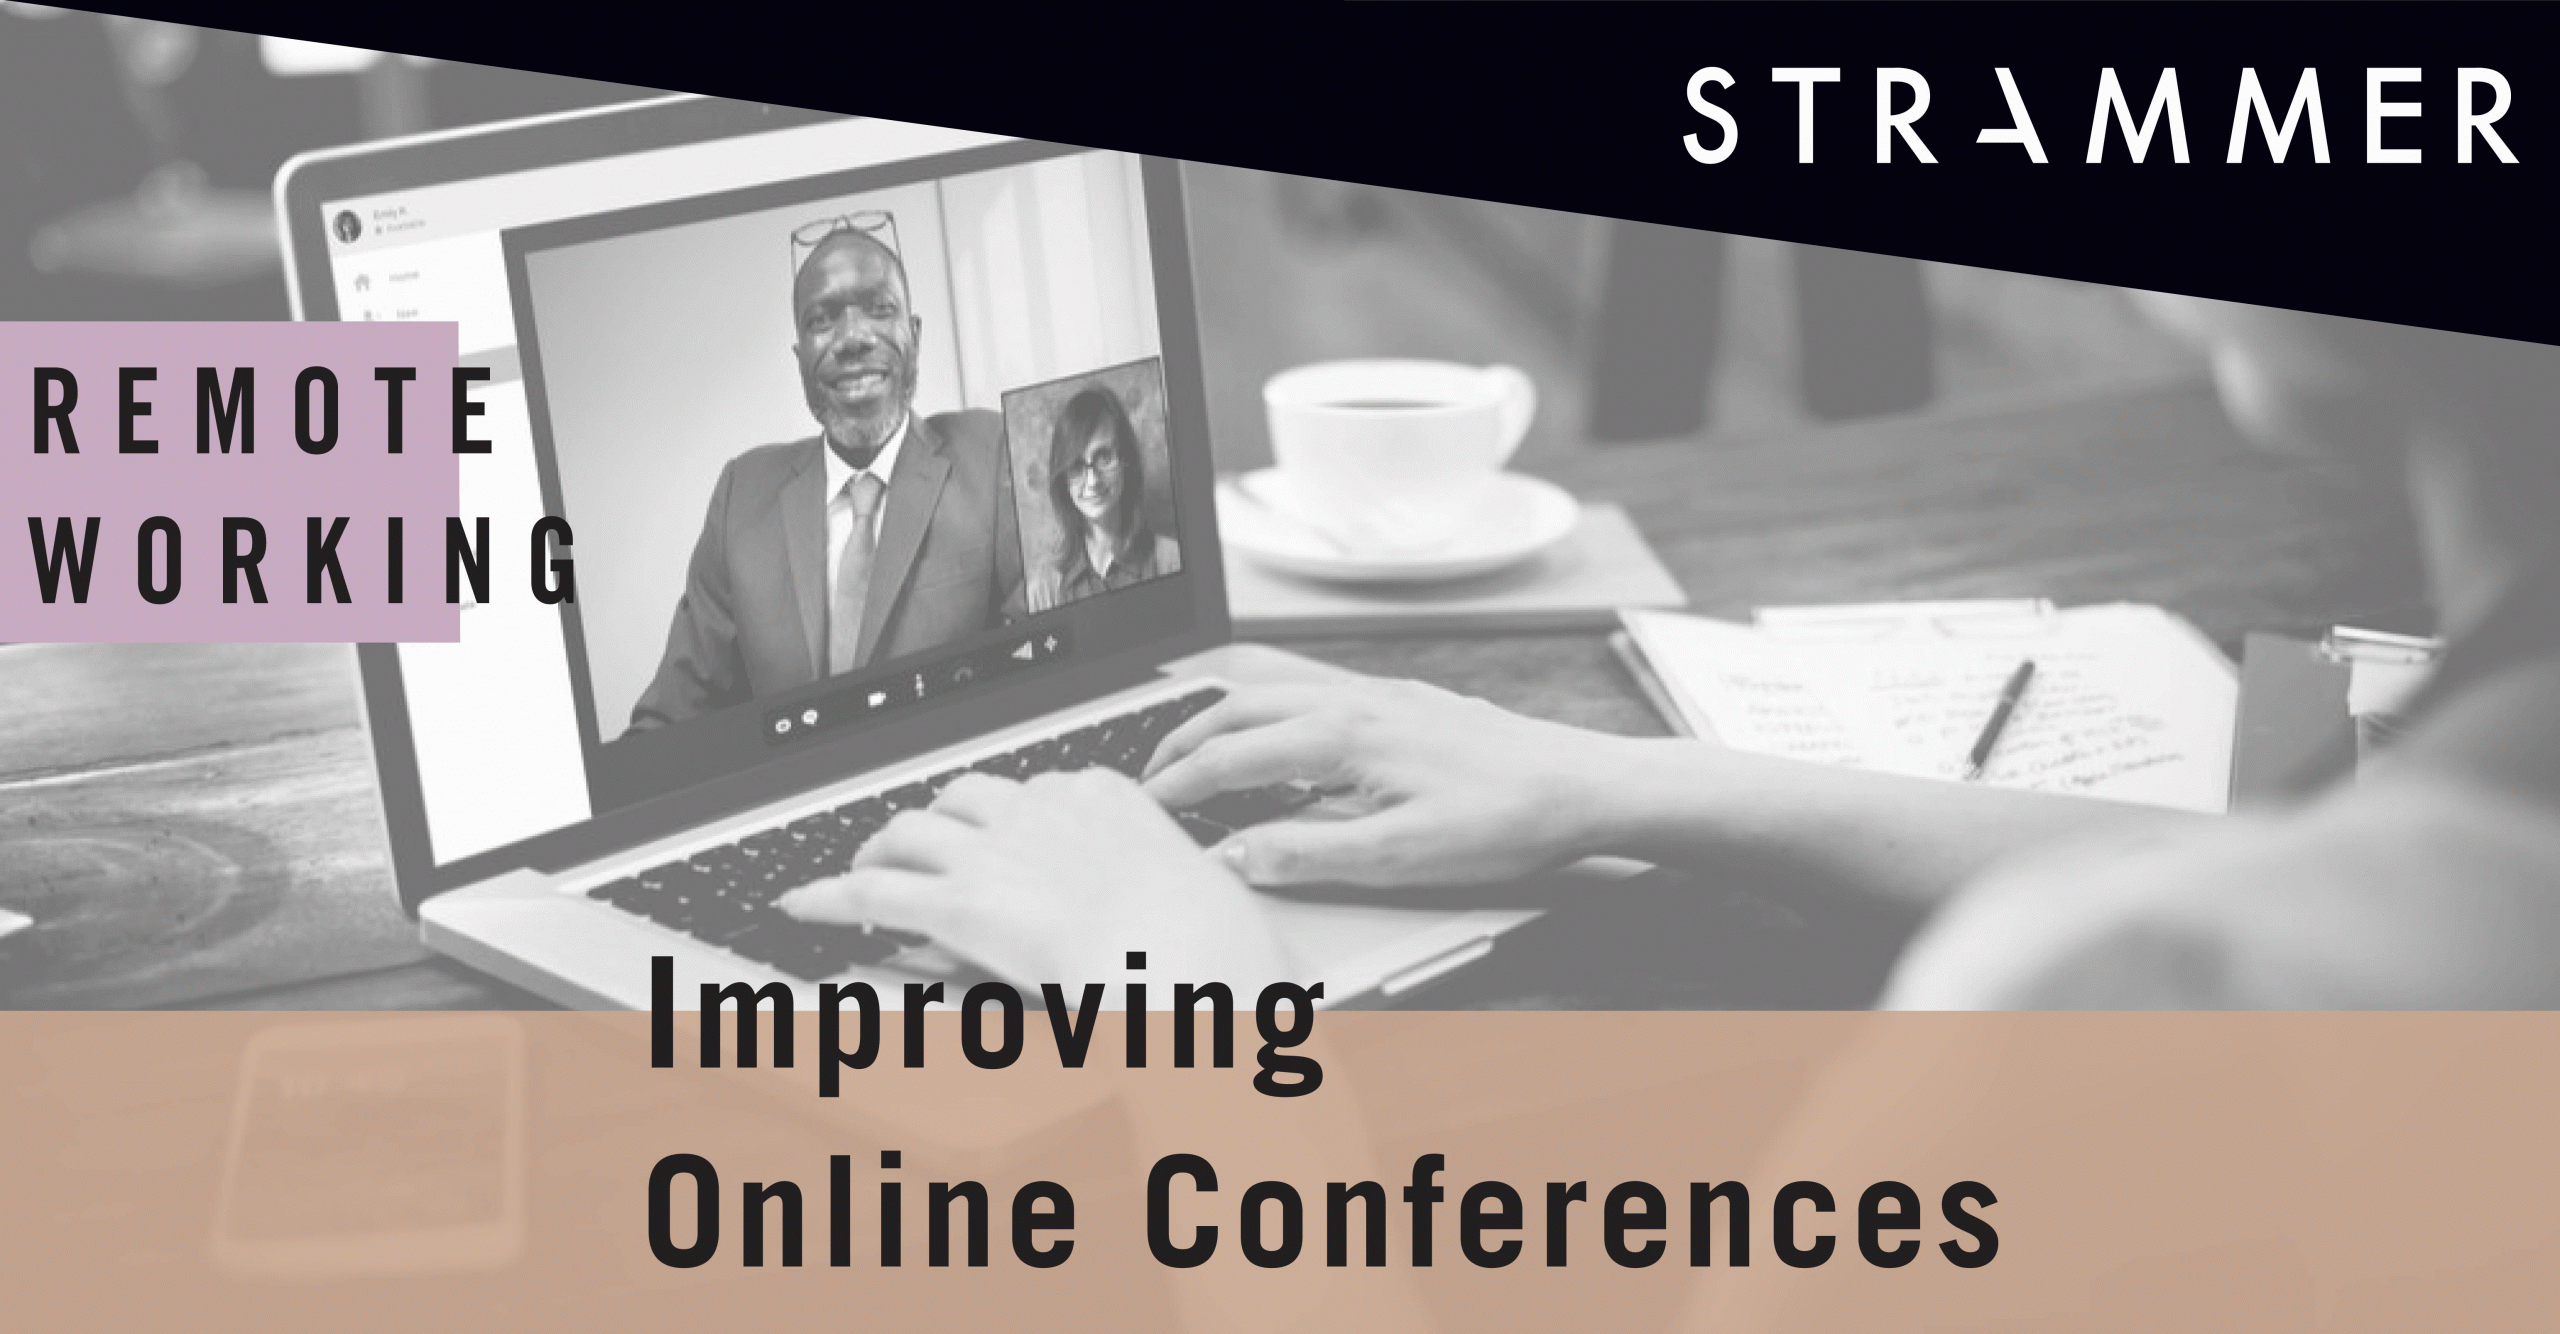 Improving Online Video Conferences While Remote Working